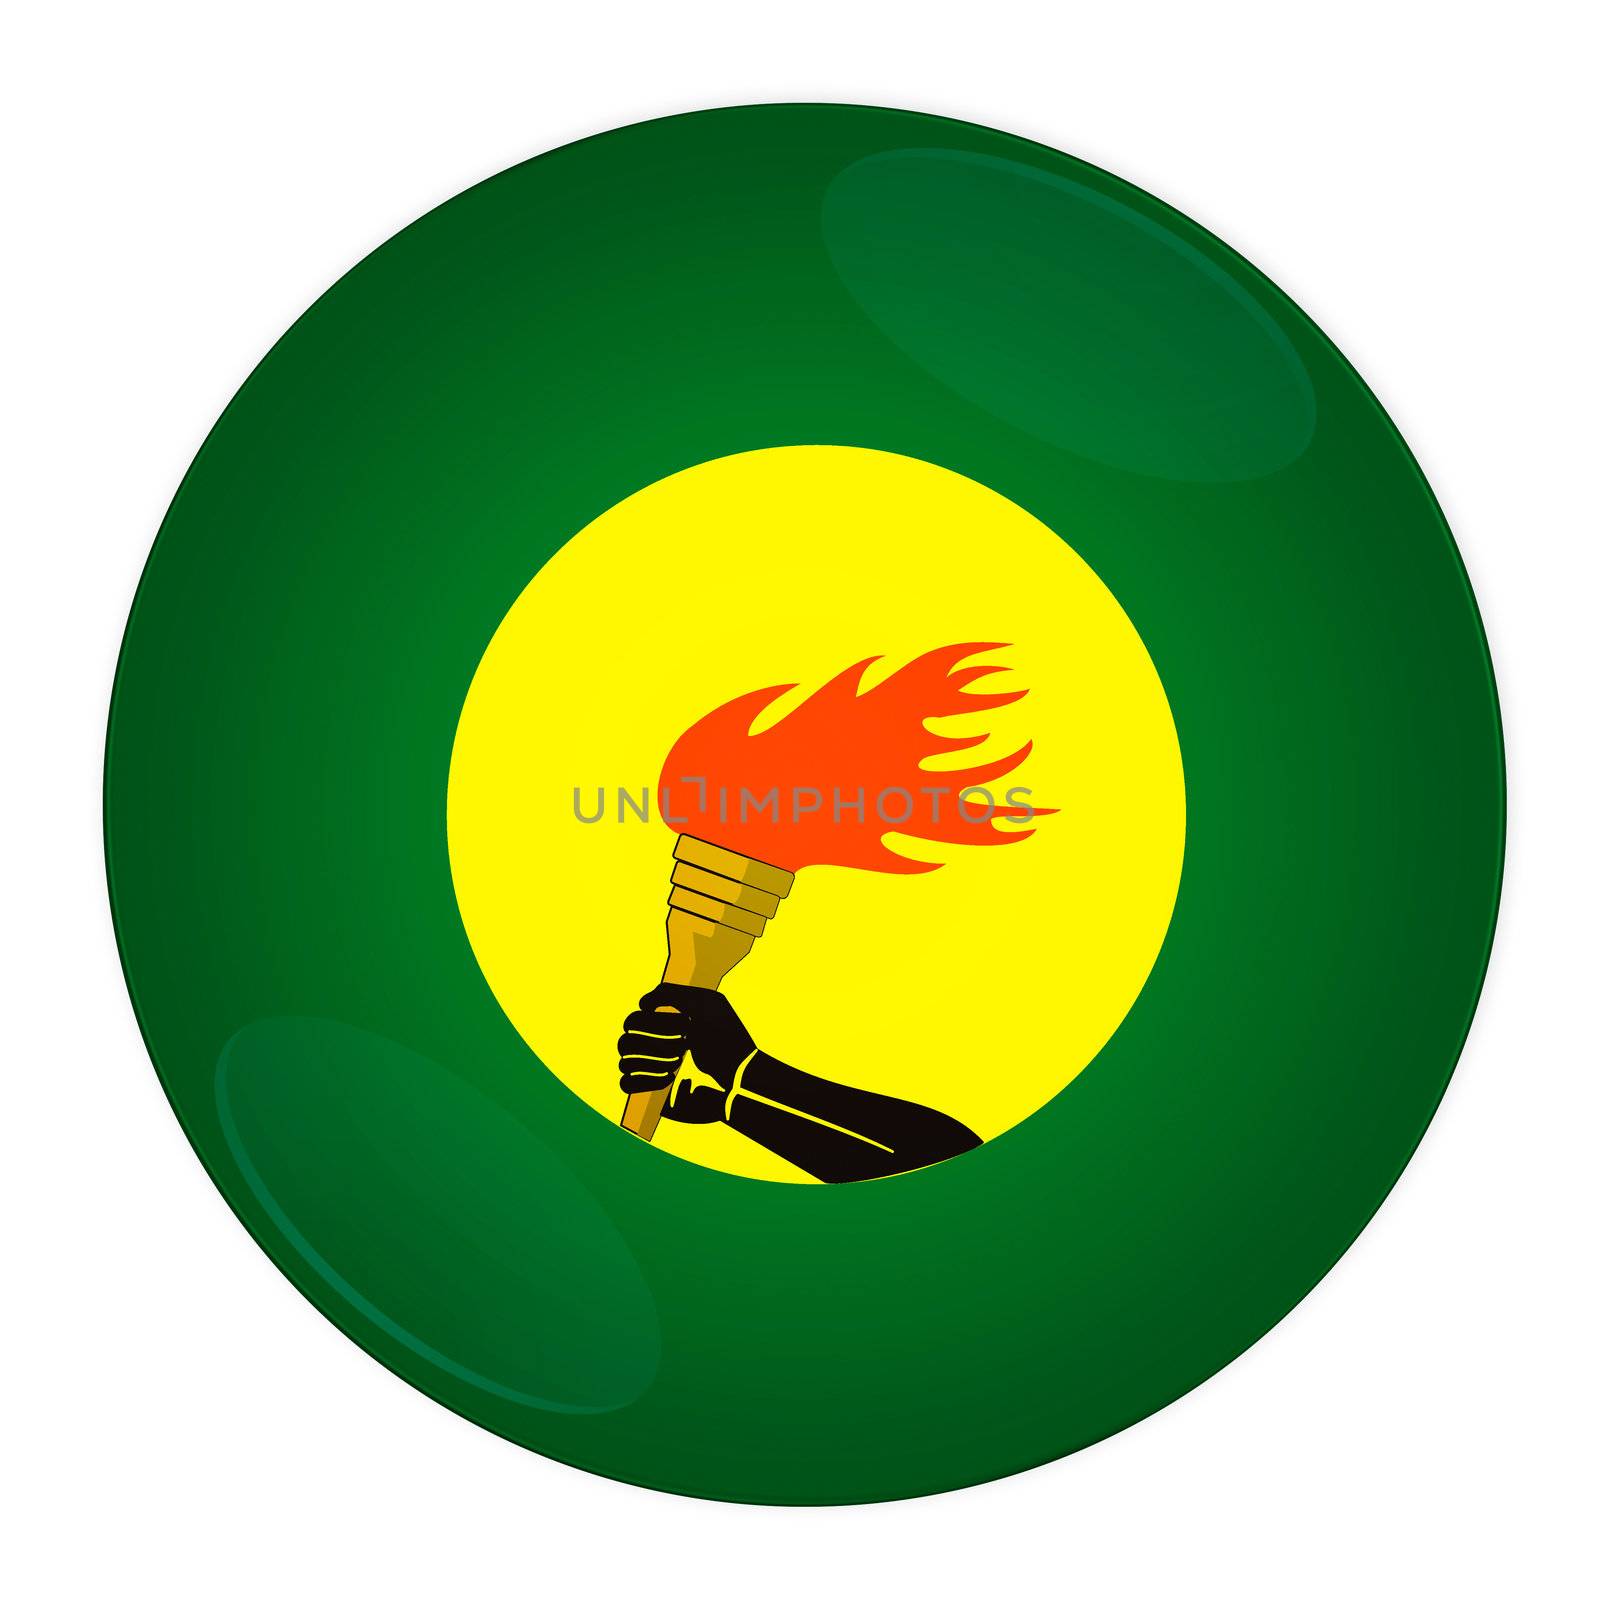 Zaire button with flag by rusak